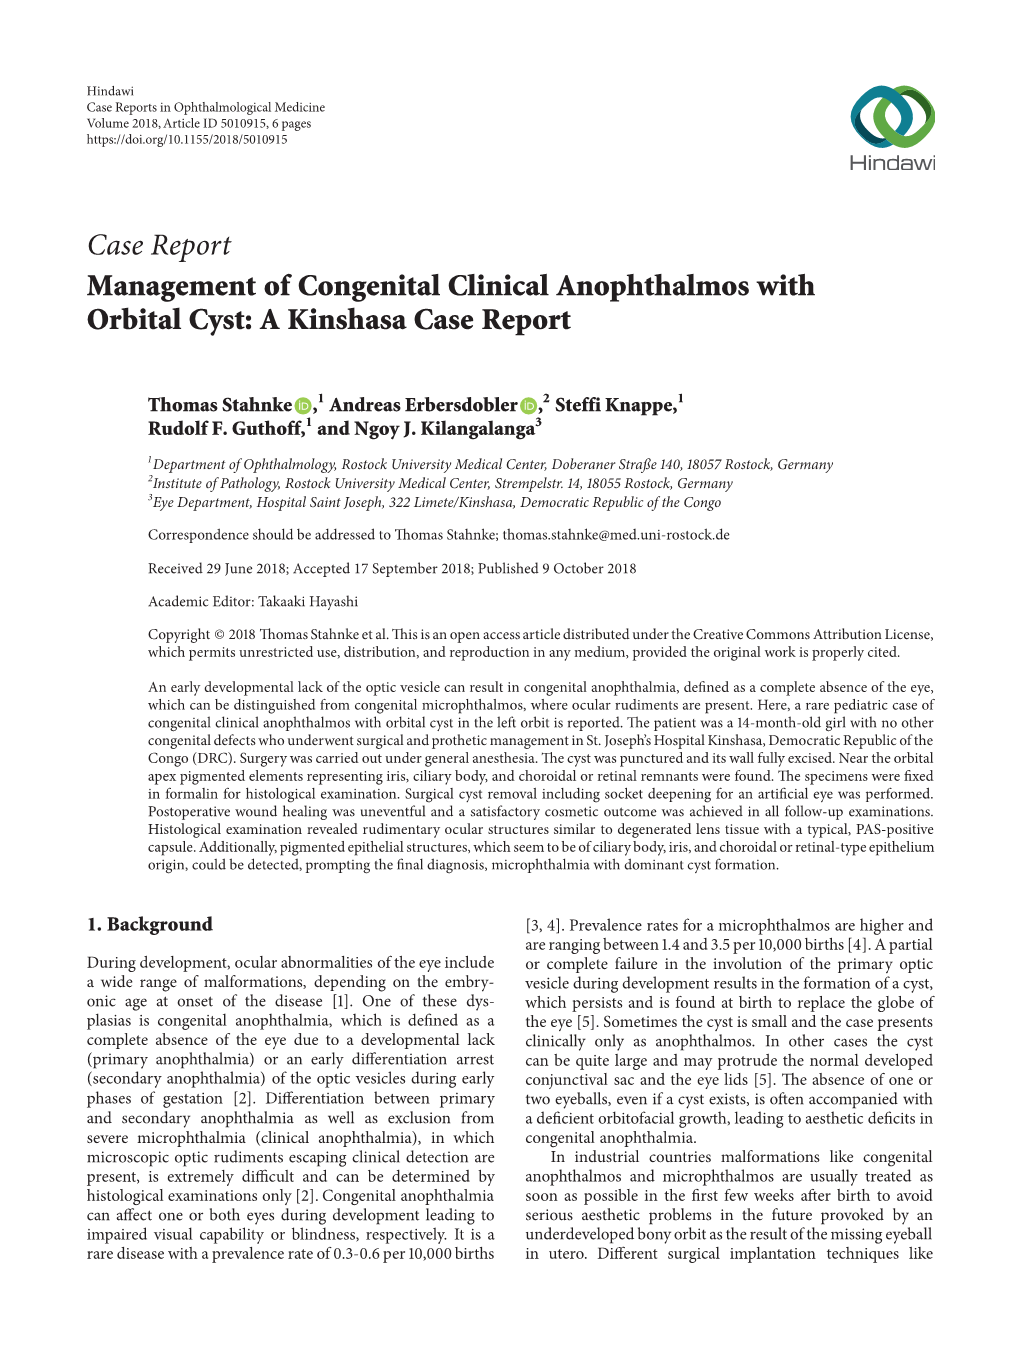 Case Report Management of Congenital Clinical Anophthalmos with Orbital Cyst: a Kinshasa Case Report